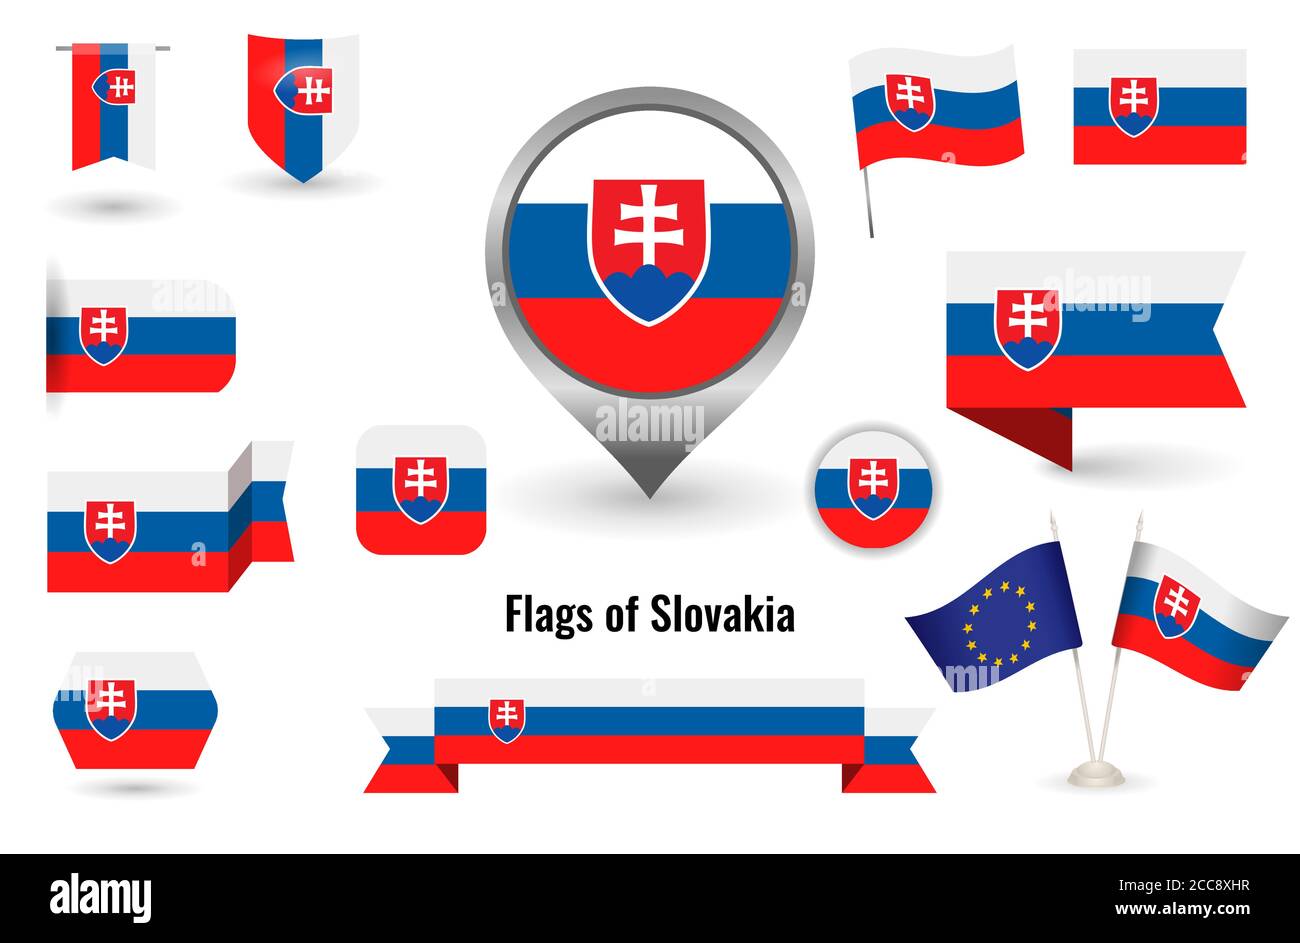 The Flag of Slovakia. Big set of icons and symbols. Square and round Slovakia flag. Collection of different flags of horizontal and vertical. Stock Vector